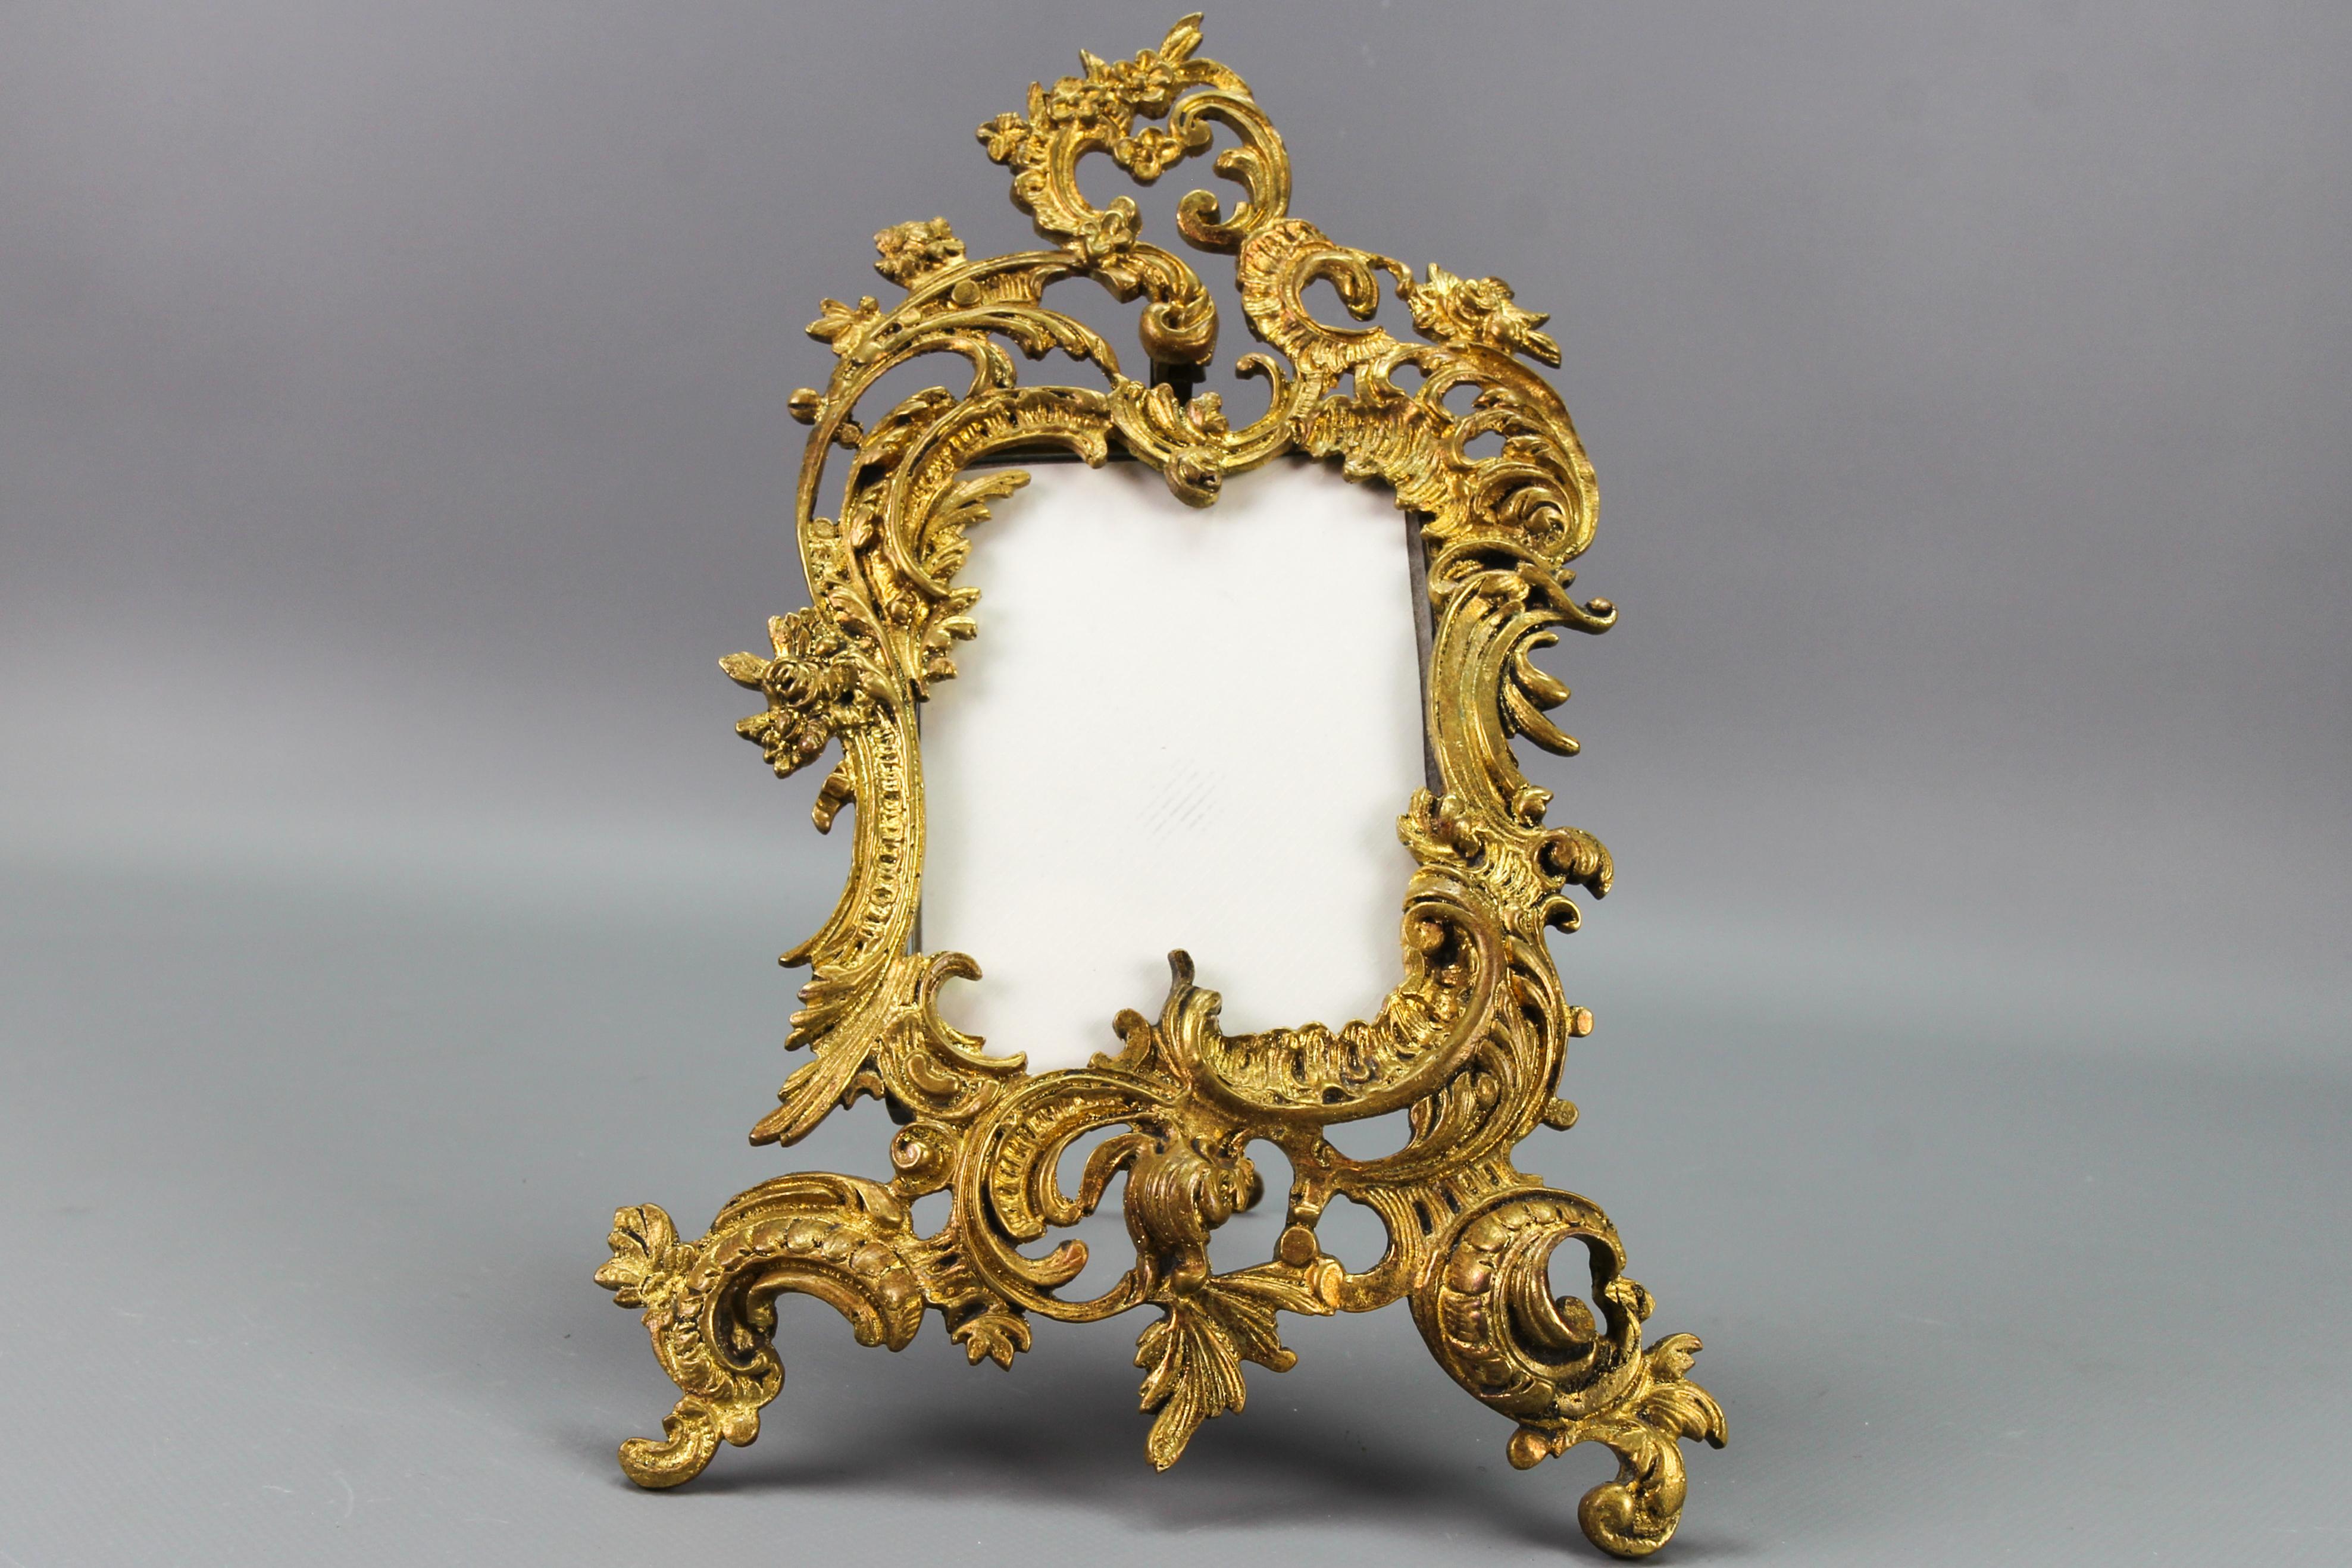 French Rococo-style bronze photo or picture desktop easel frame from circa the end of the 1920s.
This magnificent ornate frame is made of bronze and has an easel supporting leg on the back. Decorated with typical Rococo or Louis XV-style scroll,